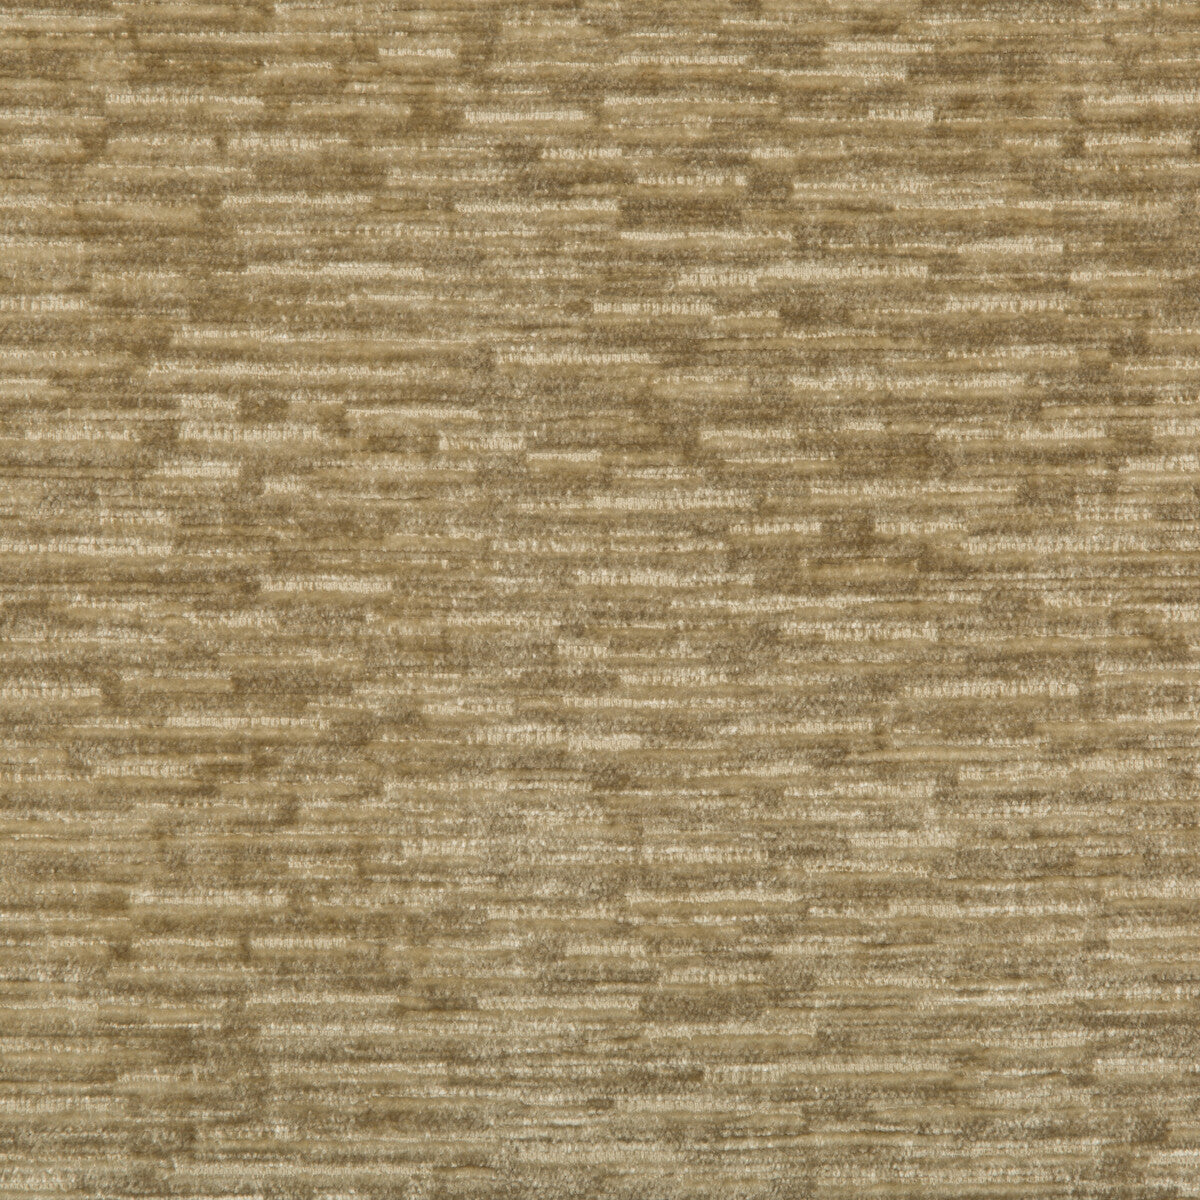 Kravet Smart fabric in 34731-40 color - pattern 34731.40.0 - by Kravet Smart in the Performance collection